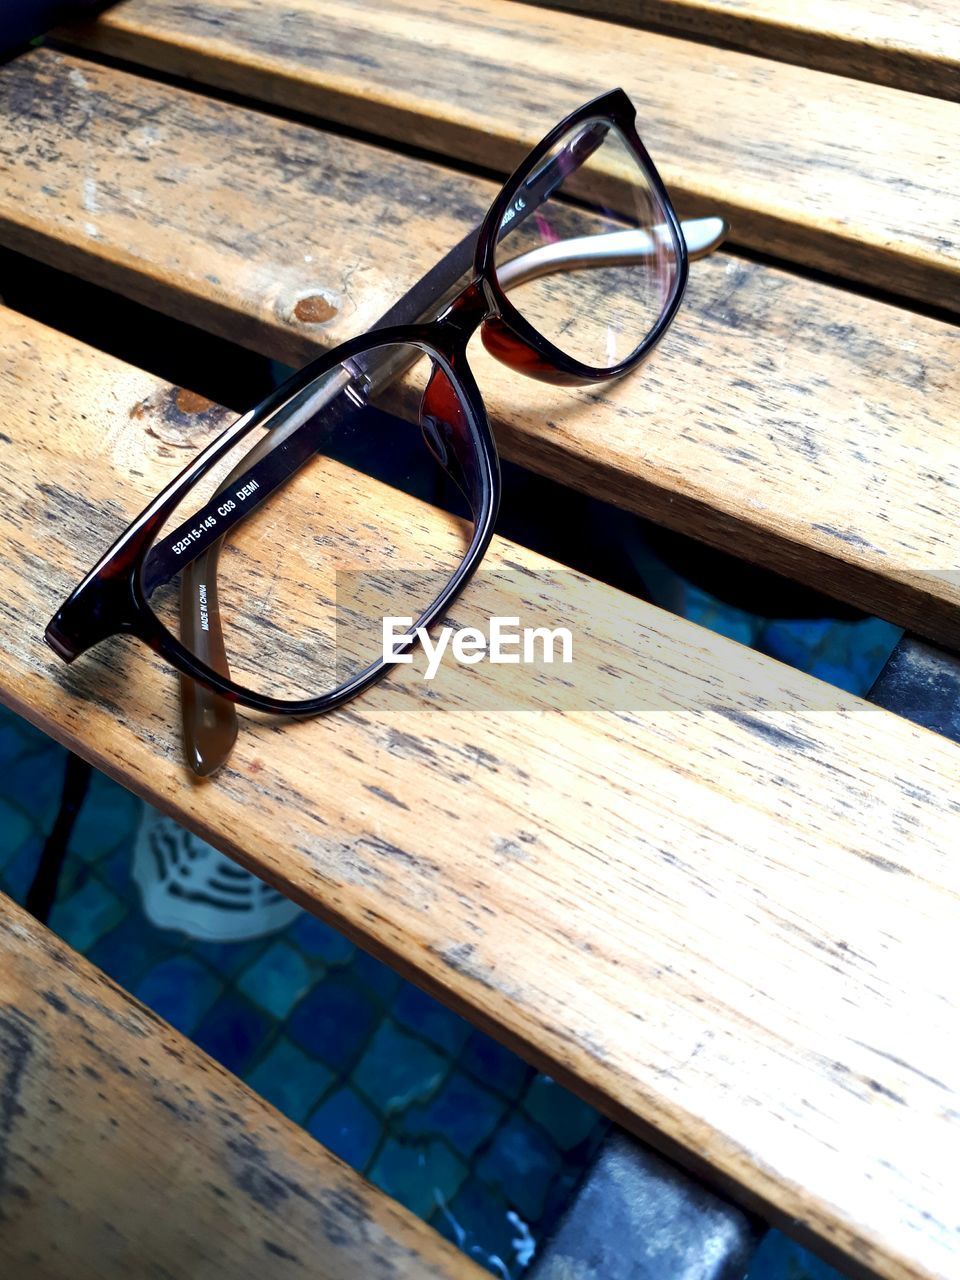 HIGH ANGLE VIEW OF SUNGLASSES AND TABLE ON FLOOR